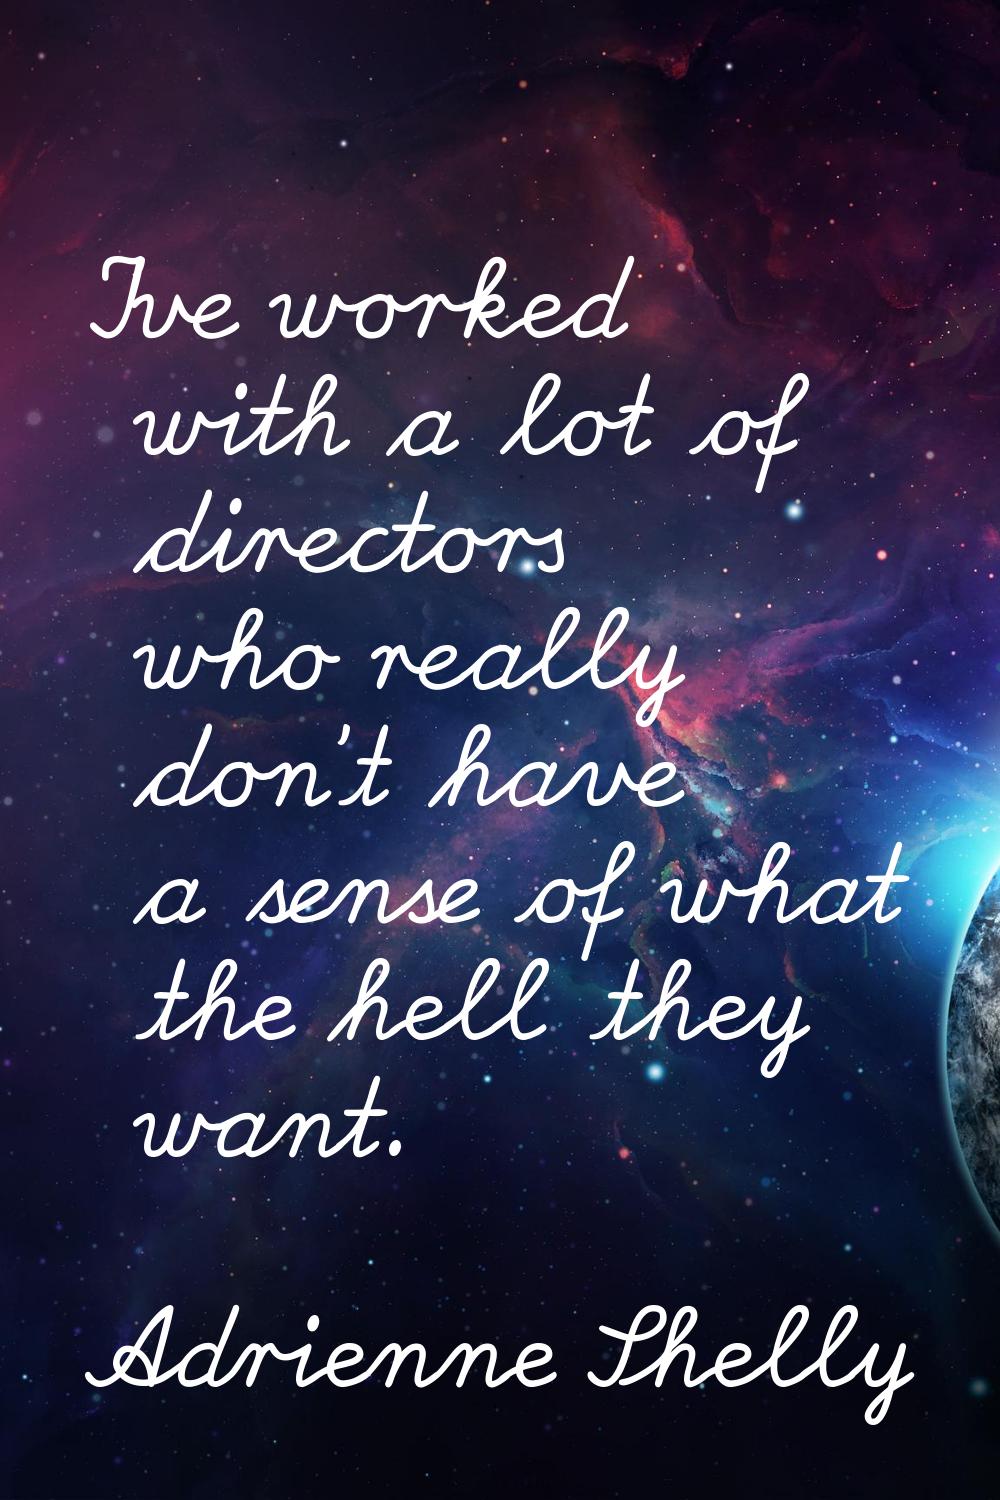 I've worked with a lot of directors who really don't have a sense of what the hell they want.